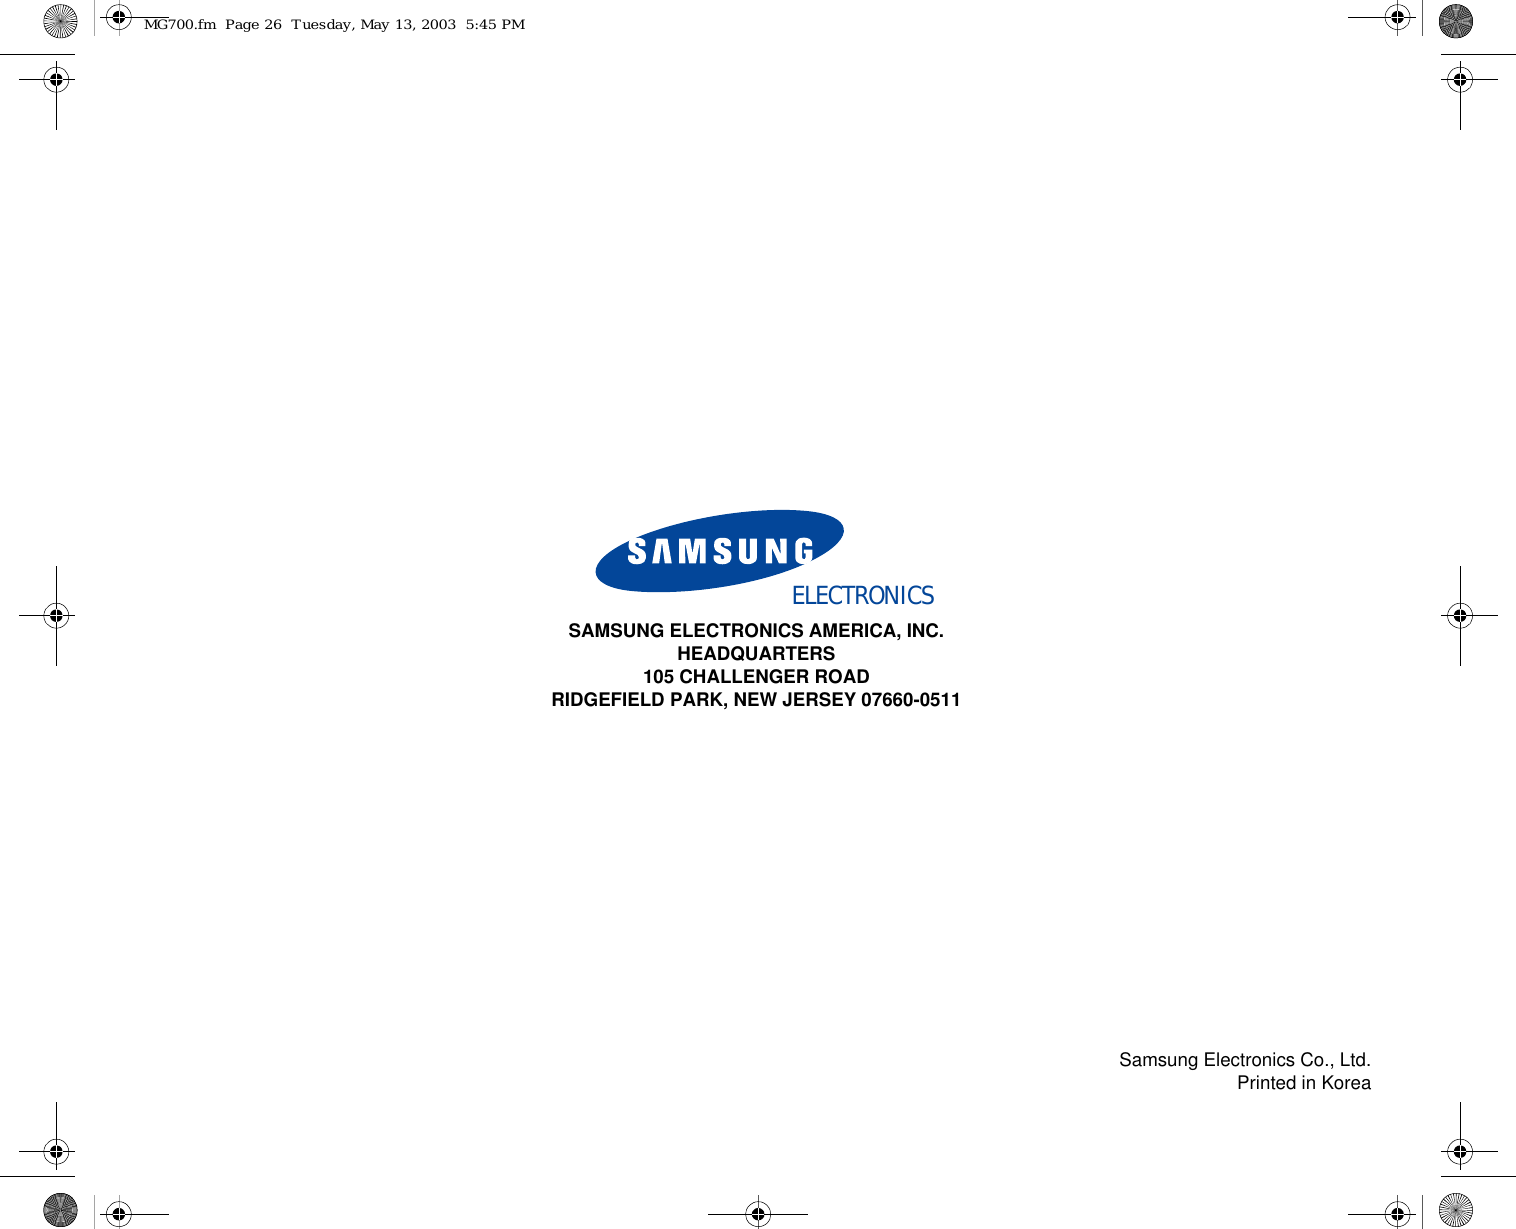 Samsung Electronics Co., Ltd.Printed in KoreaELECTRONICSSAMSUNG ELECTRONICS AMERICA, INC.HEADQUARTERS105 CHALLENGER ROADRIDGEFIELD PARK, NEW JERSEY 07660-0511MG700.fm  Page 26  Tuesday, May 13, 2003  5:45 PM